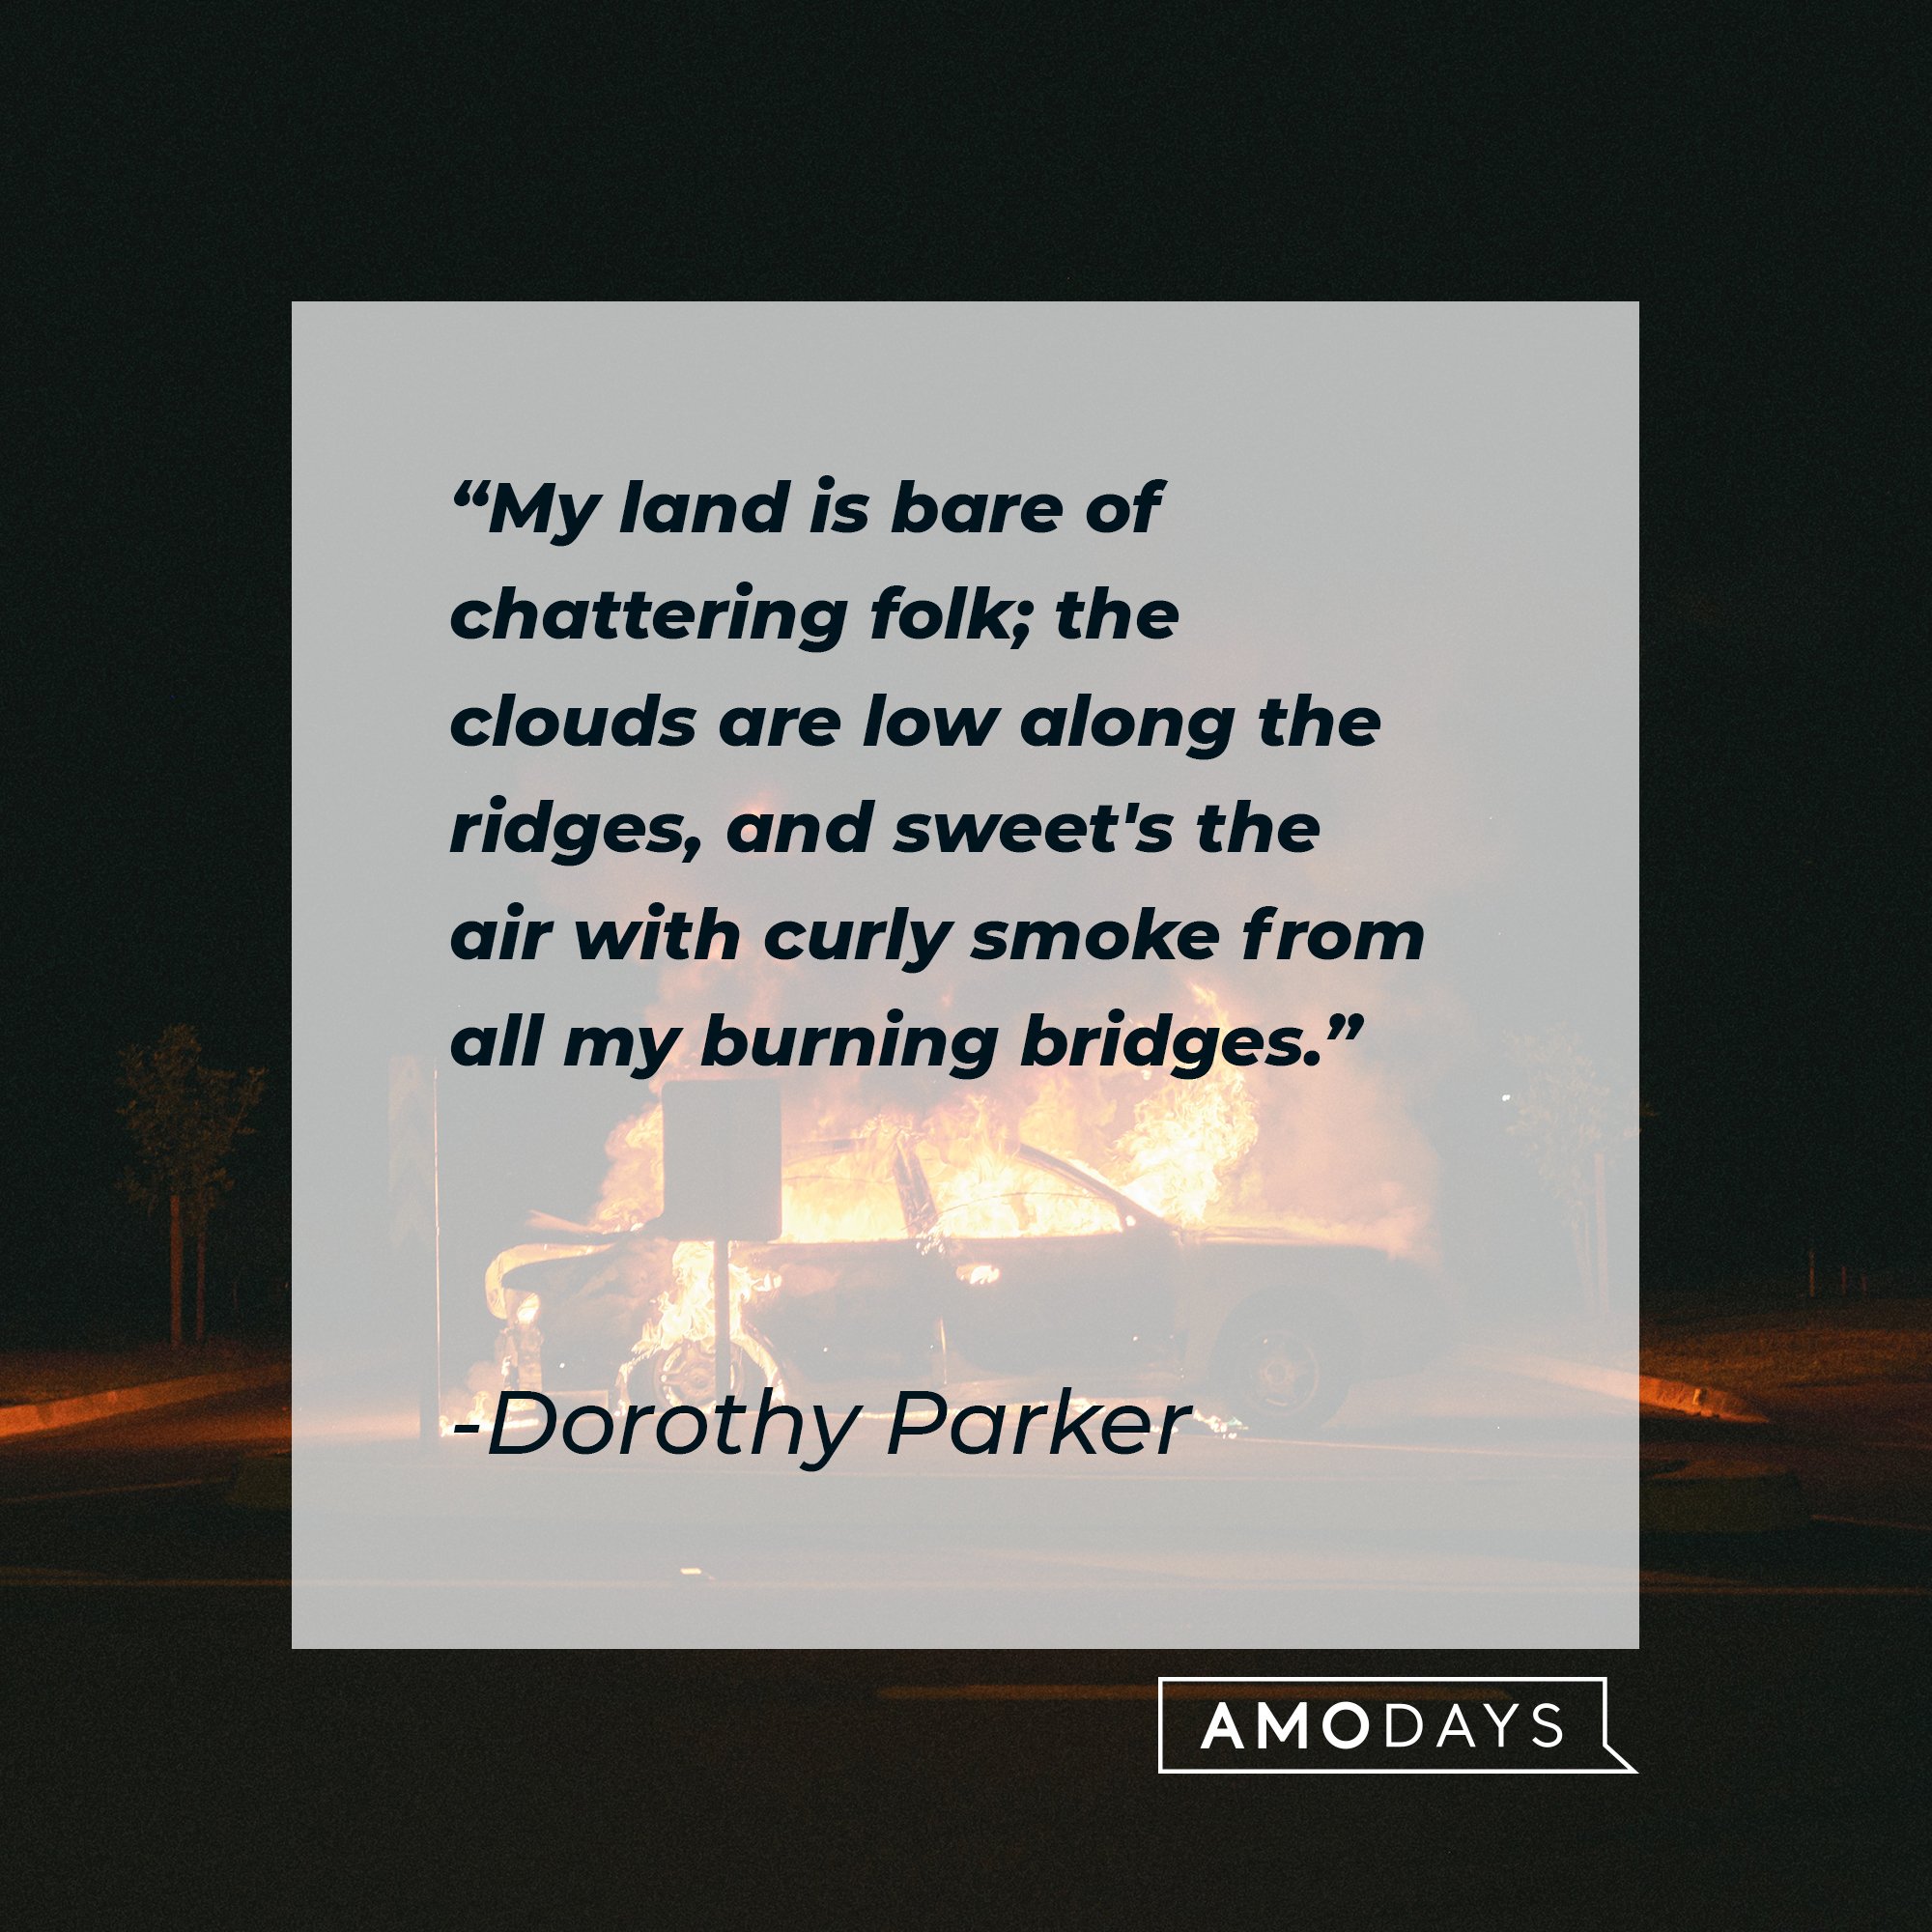  Dorothy Parker’s quote: "My land is bare of chattering folk; the clouds are low along the ridges, and sweet's the air with curly smoke from all my burning bridges." | Image: AmoDays